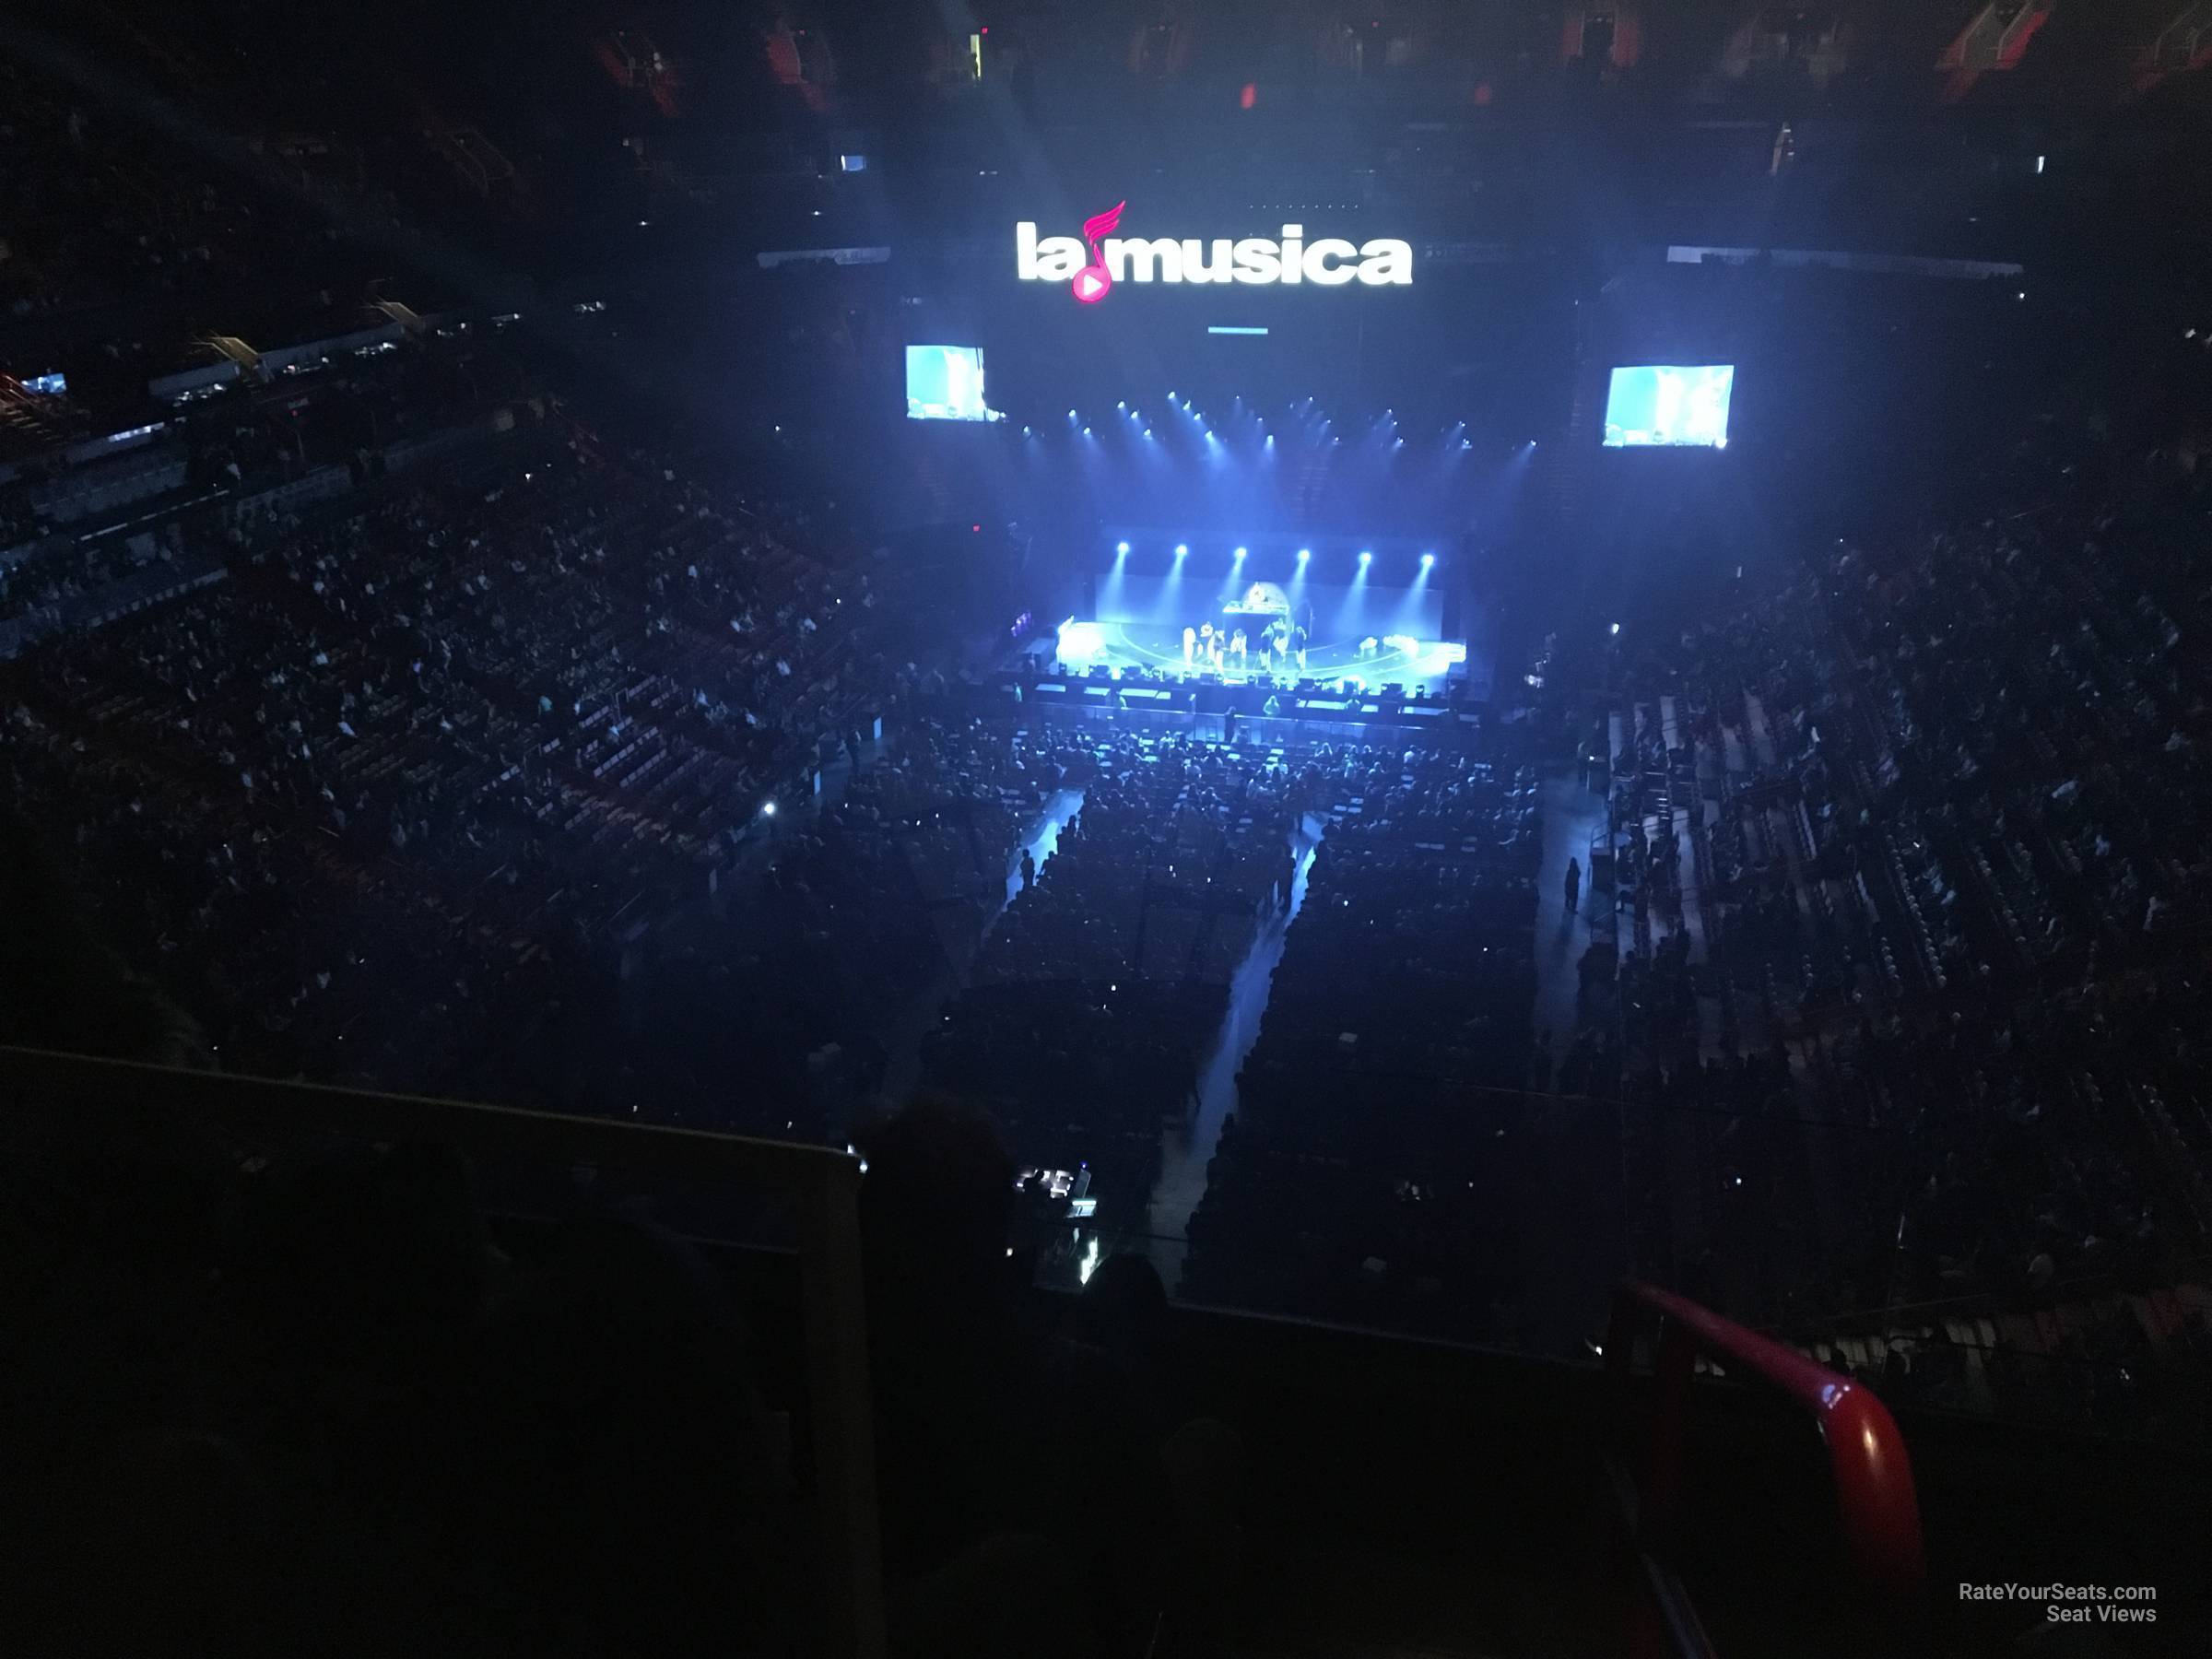 section 414, row 4 seat view  for concert - kaseya center